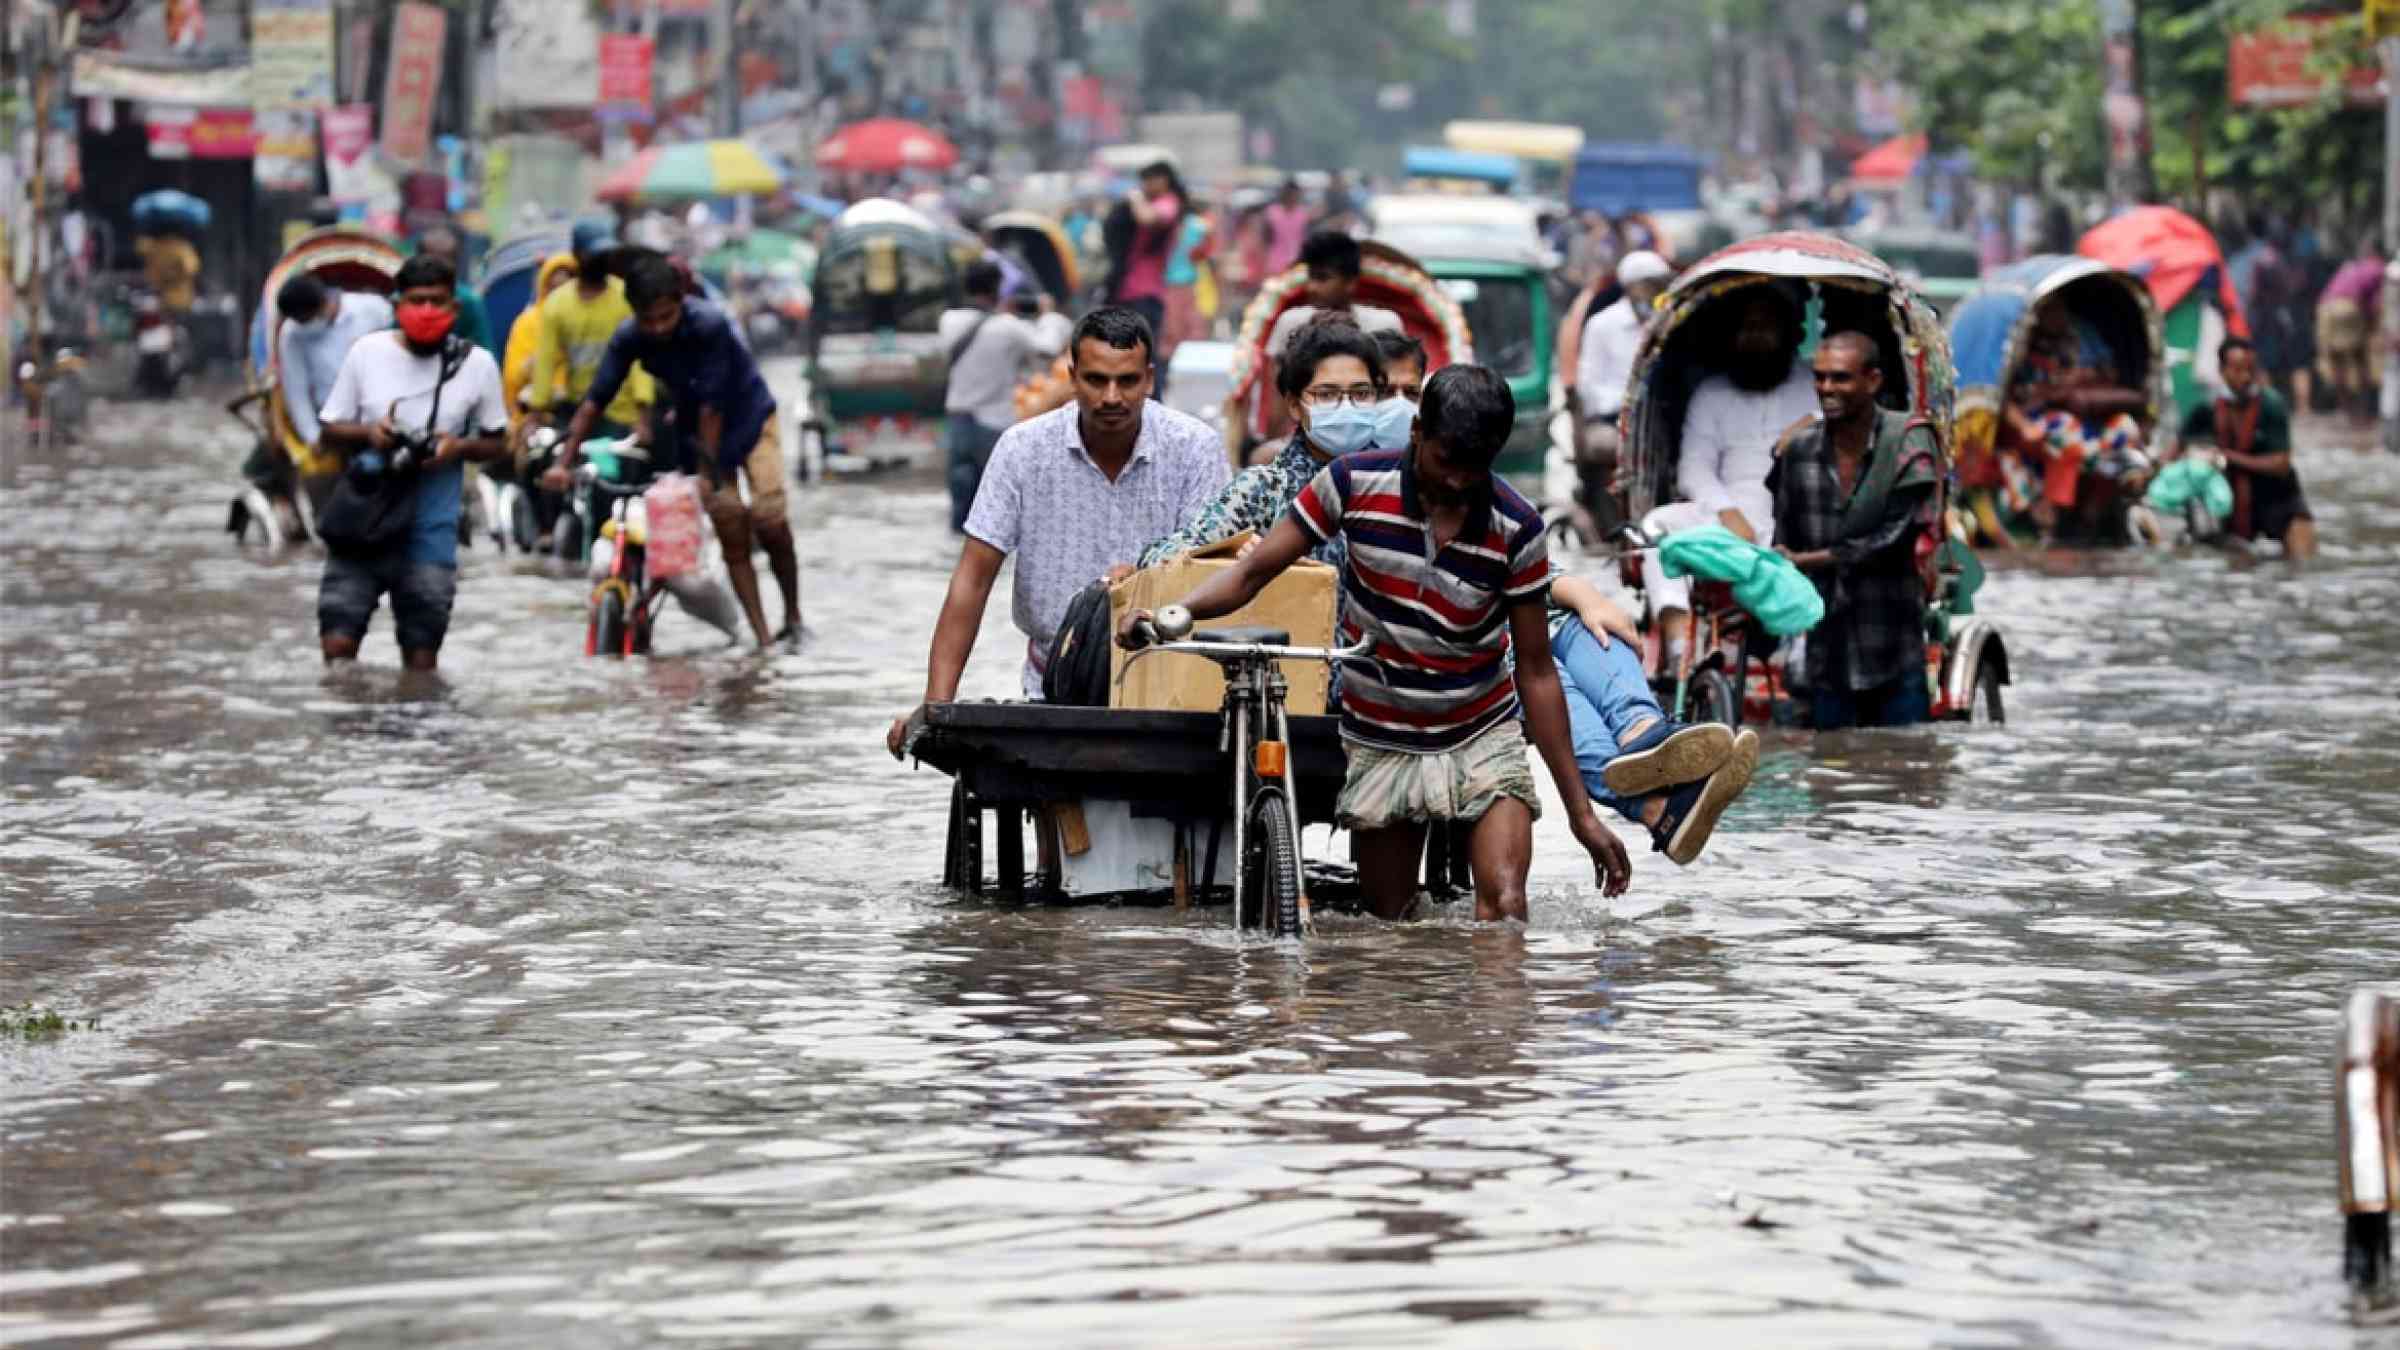 Vehicles try to drive through a flooded street in Dhaka, Bangladesh (2020)